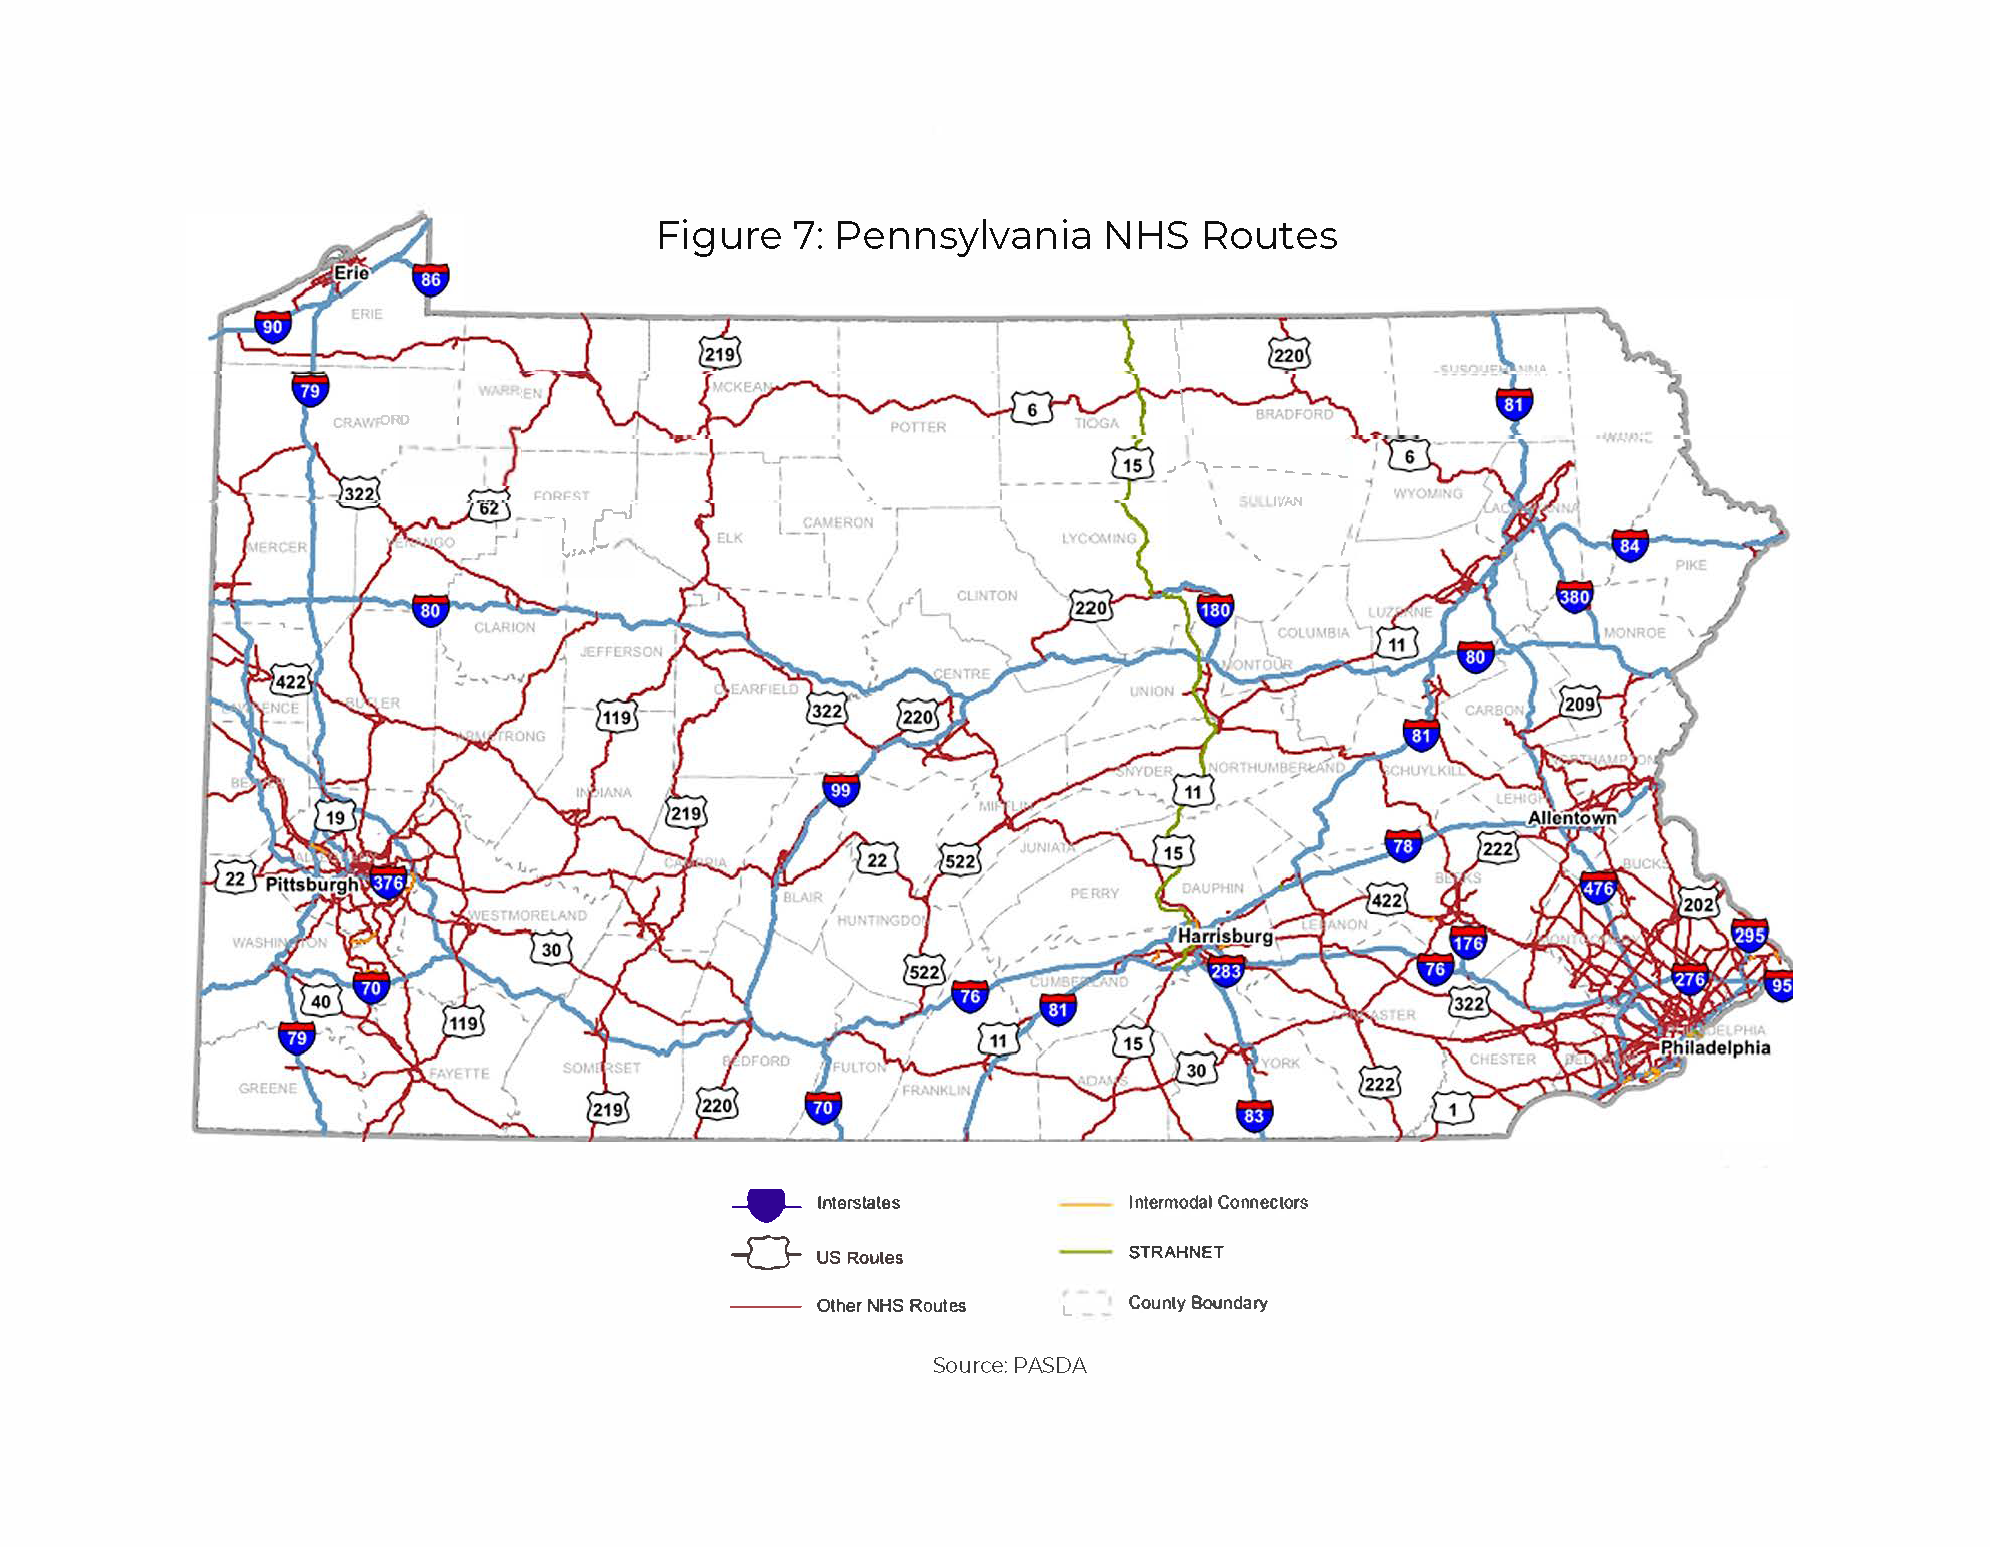 State map of Pennsylvania illustrating the National Highway System Routes, Interstates, US Routes, and county boundaries.